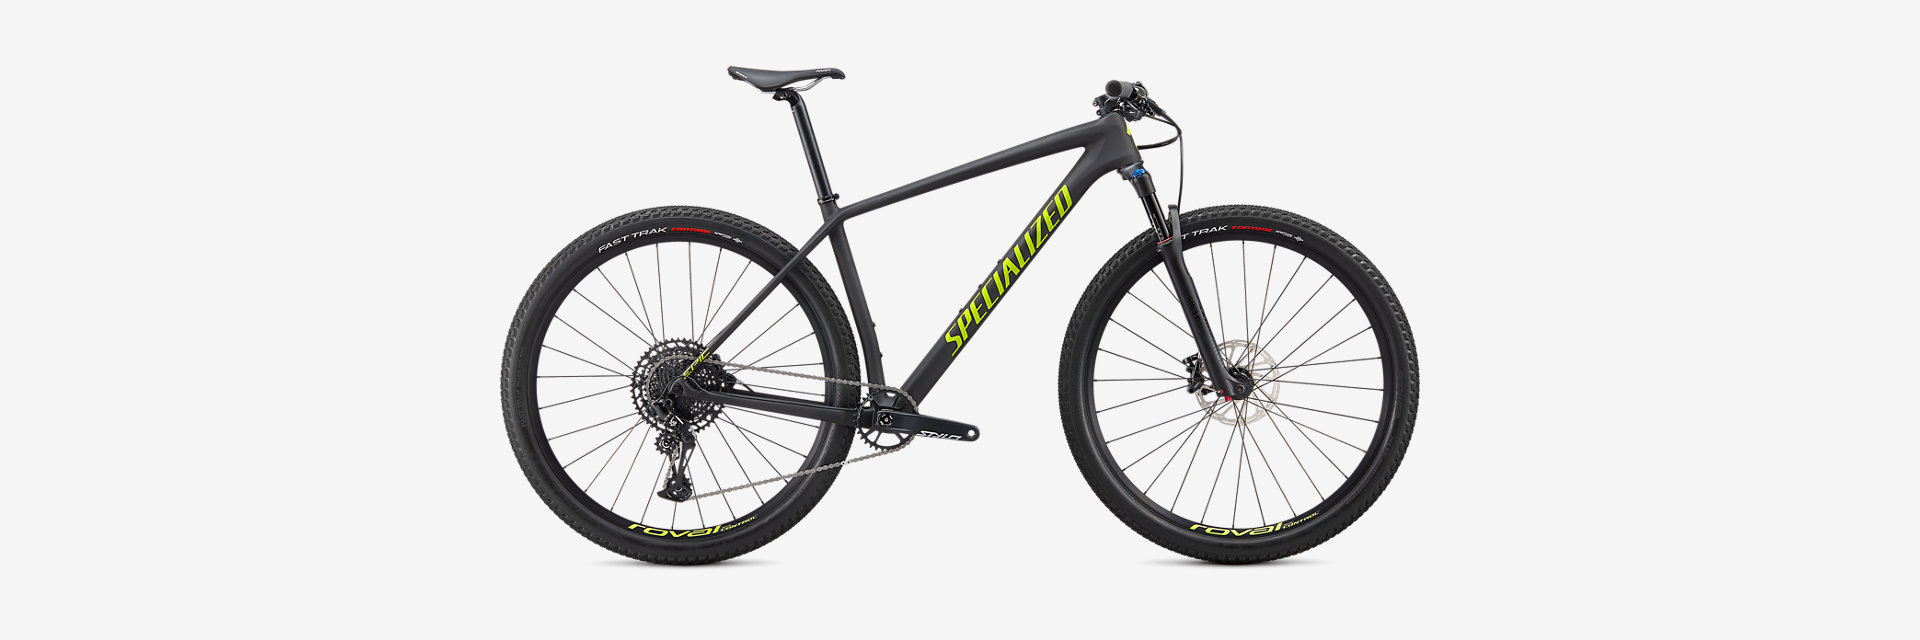 Bicicleta Montaa Specialized Crosscountry Epic Comp2020.jpg